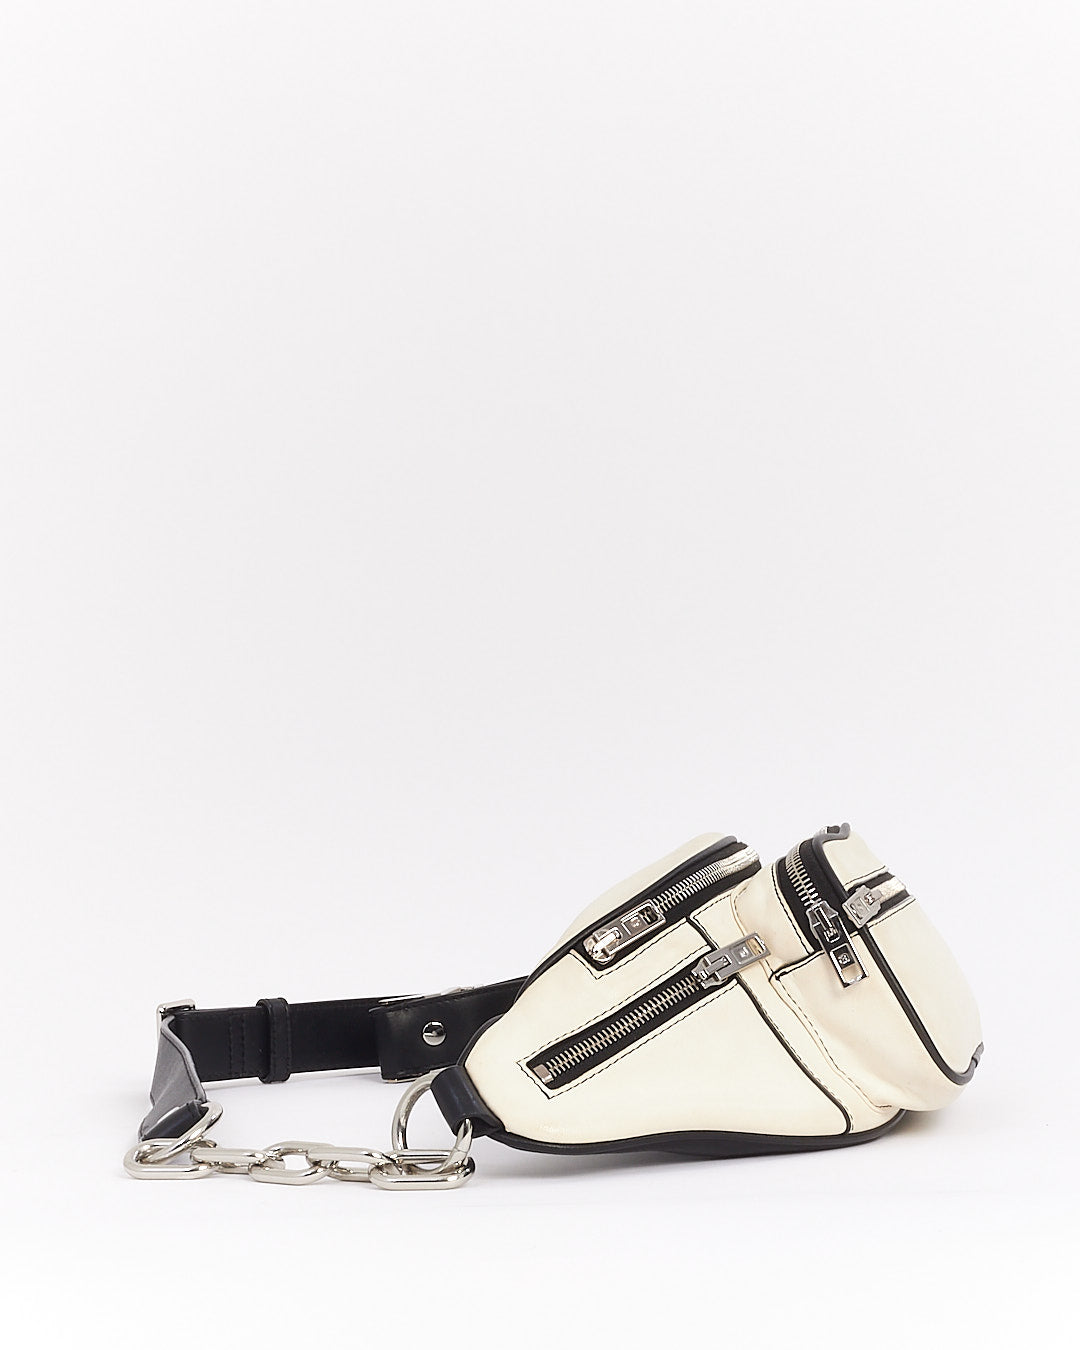 Alexander Wang White and Black Attica Fanny Pack